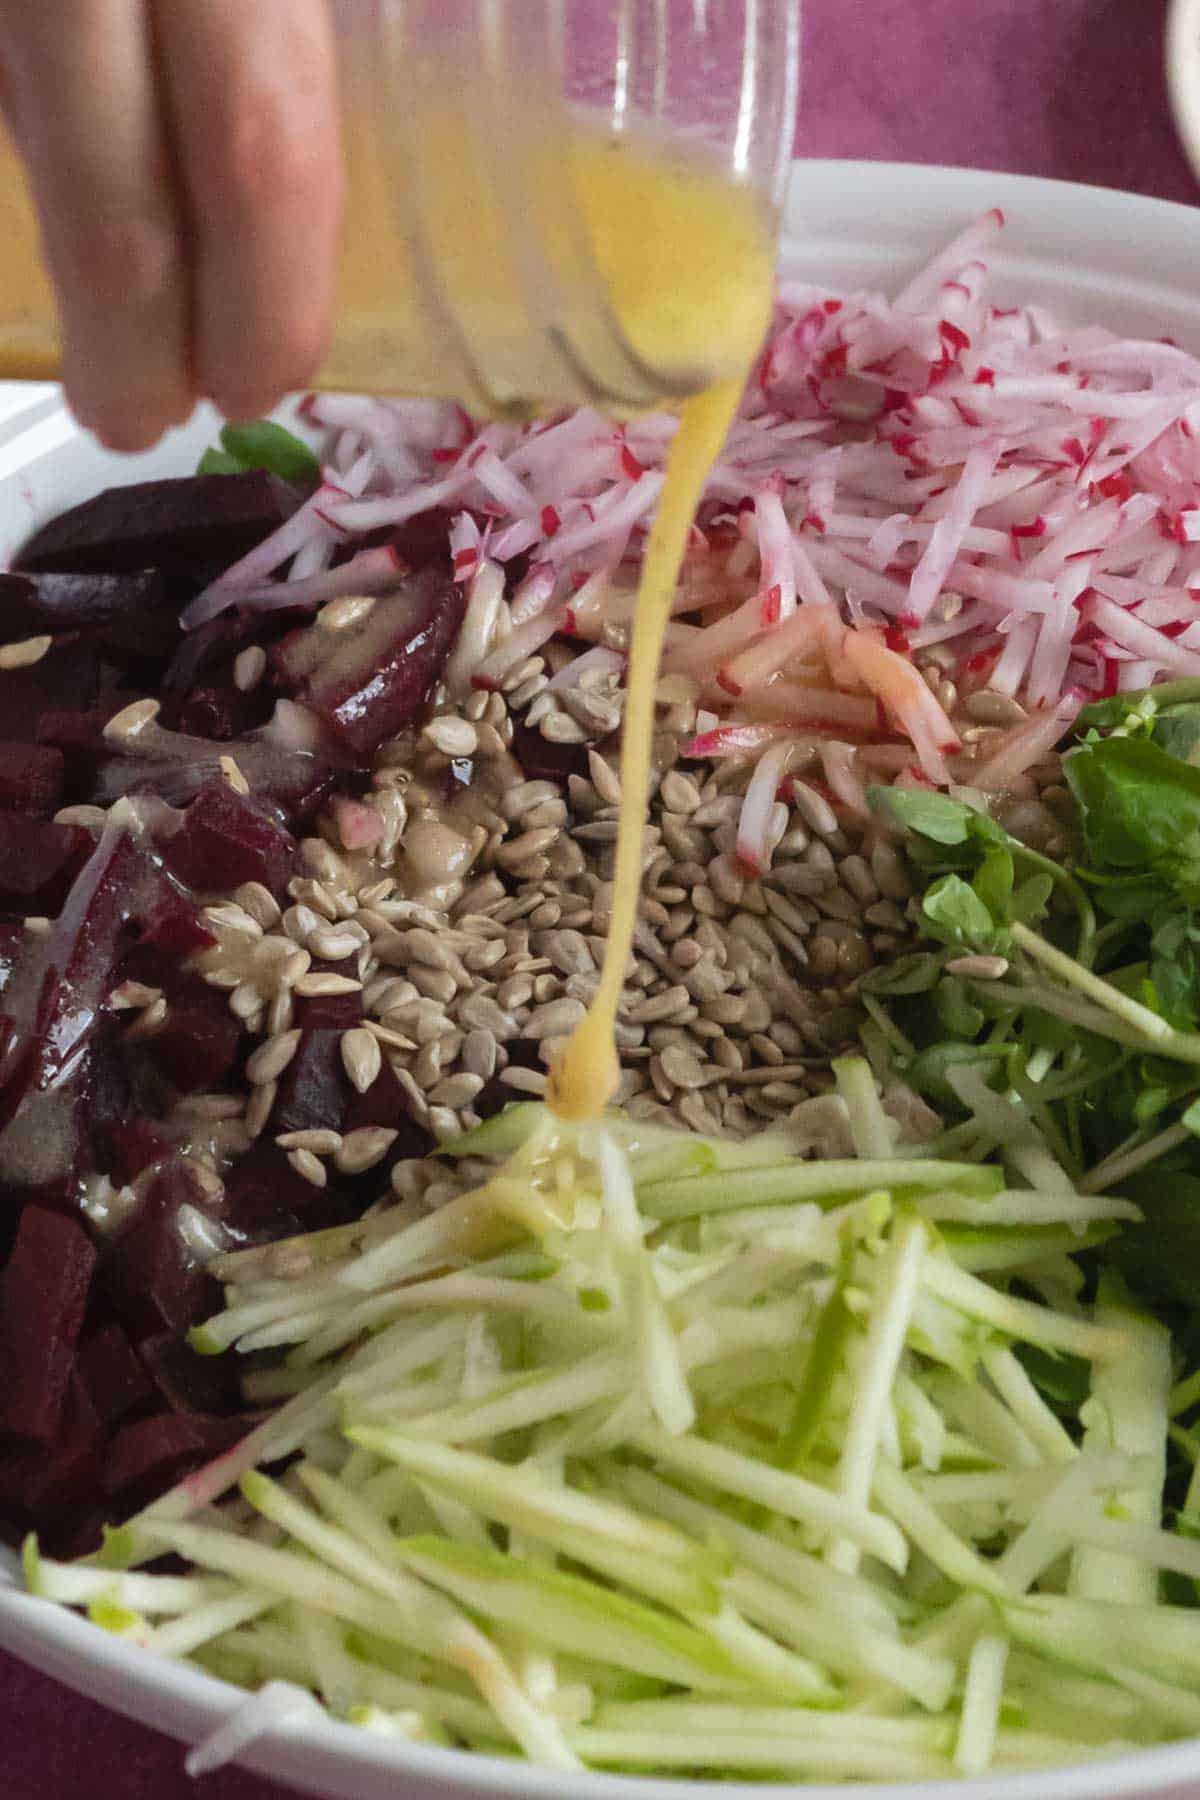 Person pouring dressing on a beet salad.